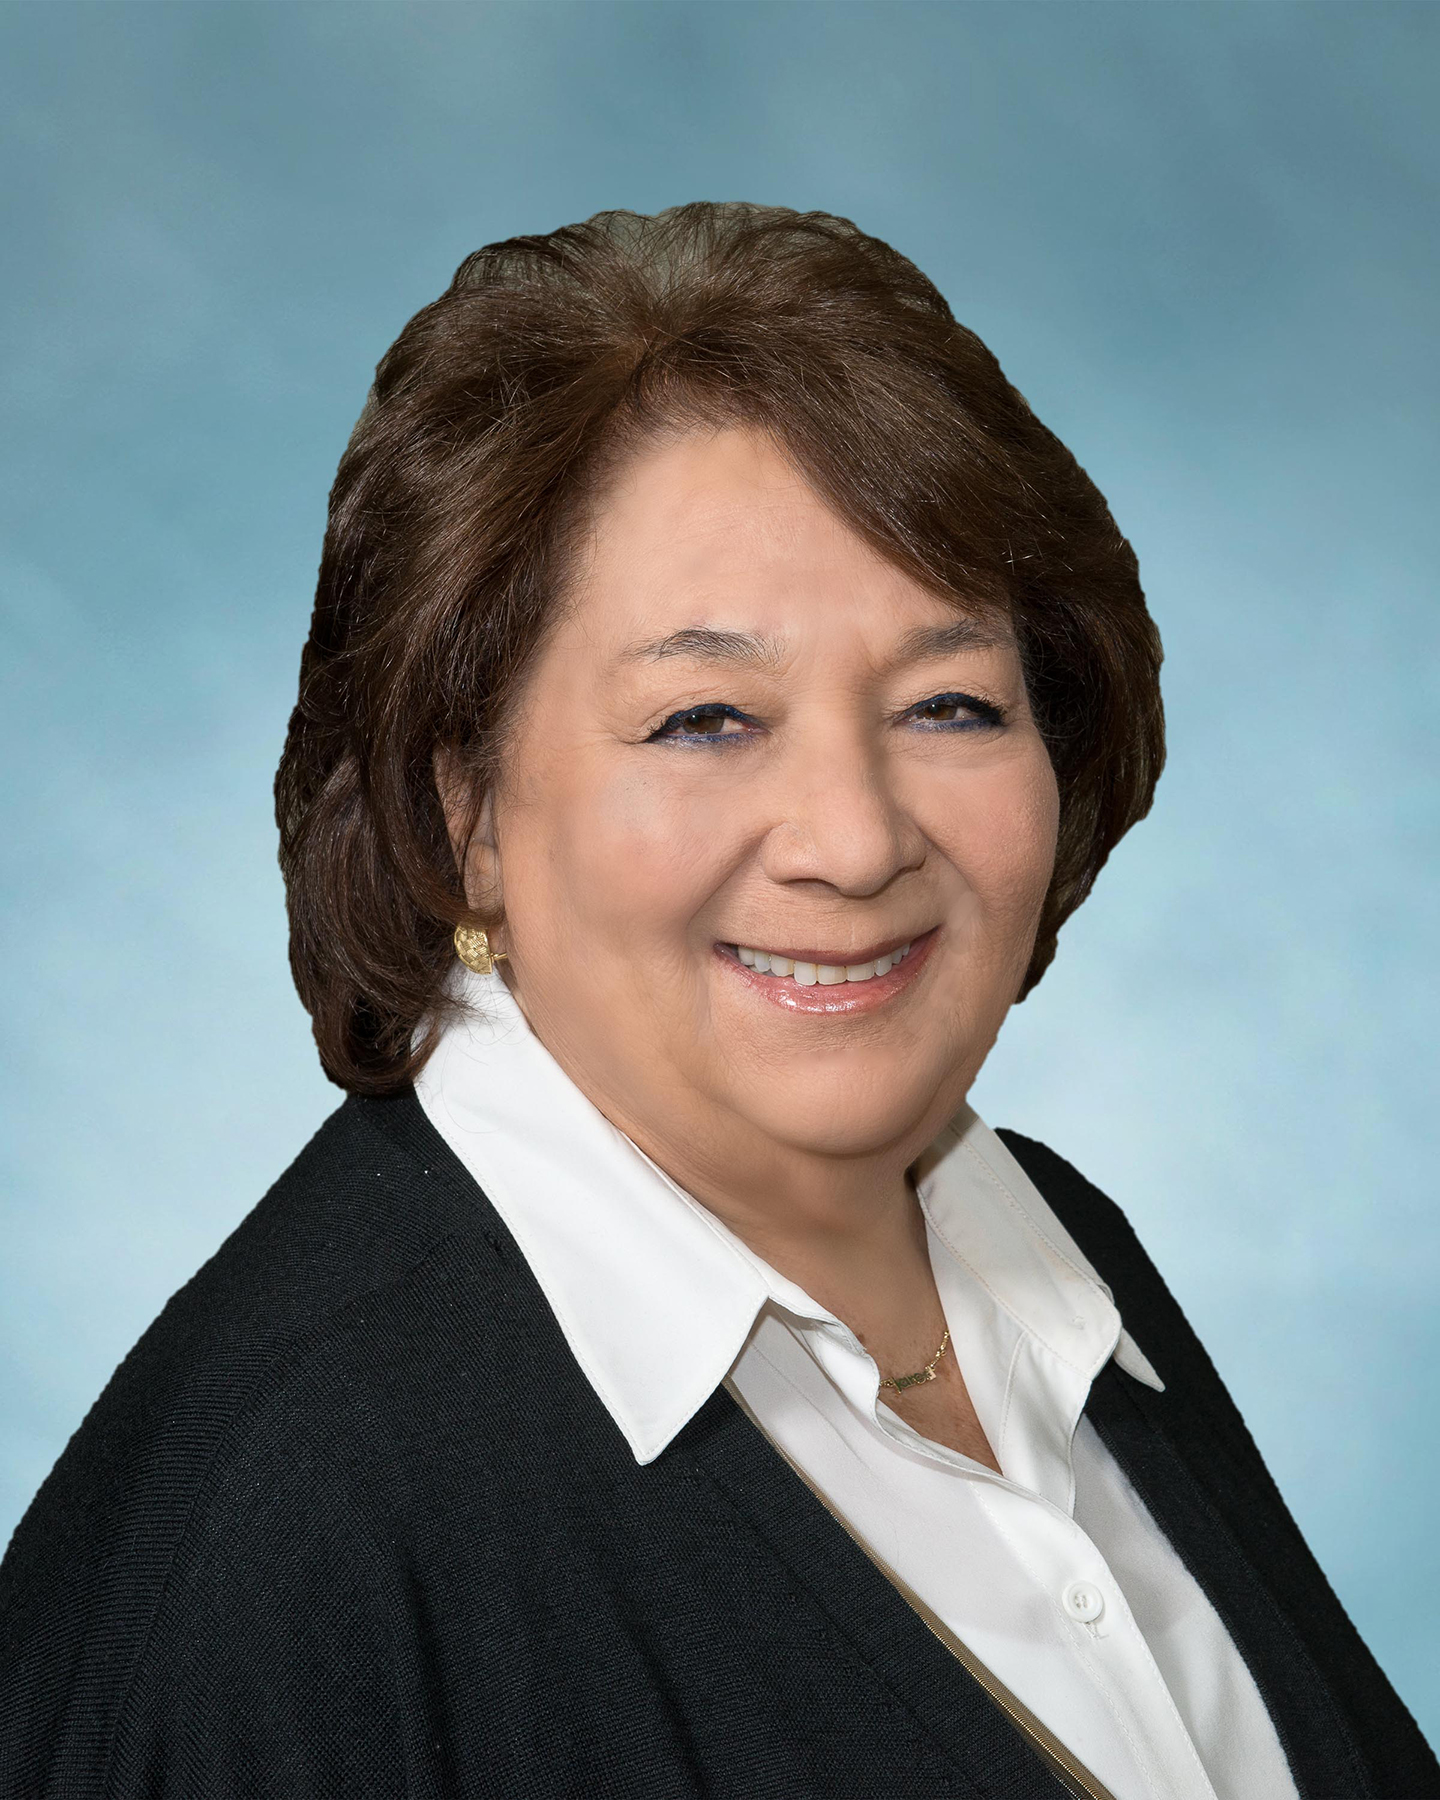 In the race for Great Neck Board of Education Trustee, incumbent Donna Peirez's name will be the only one on the ballot. (Photo courtesy of the Great Neck Public Schools)